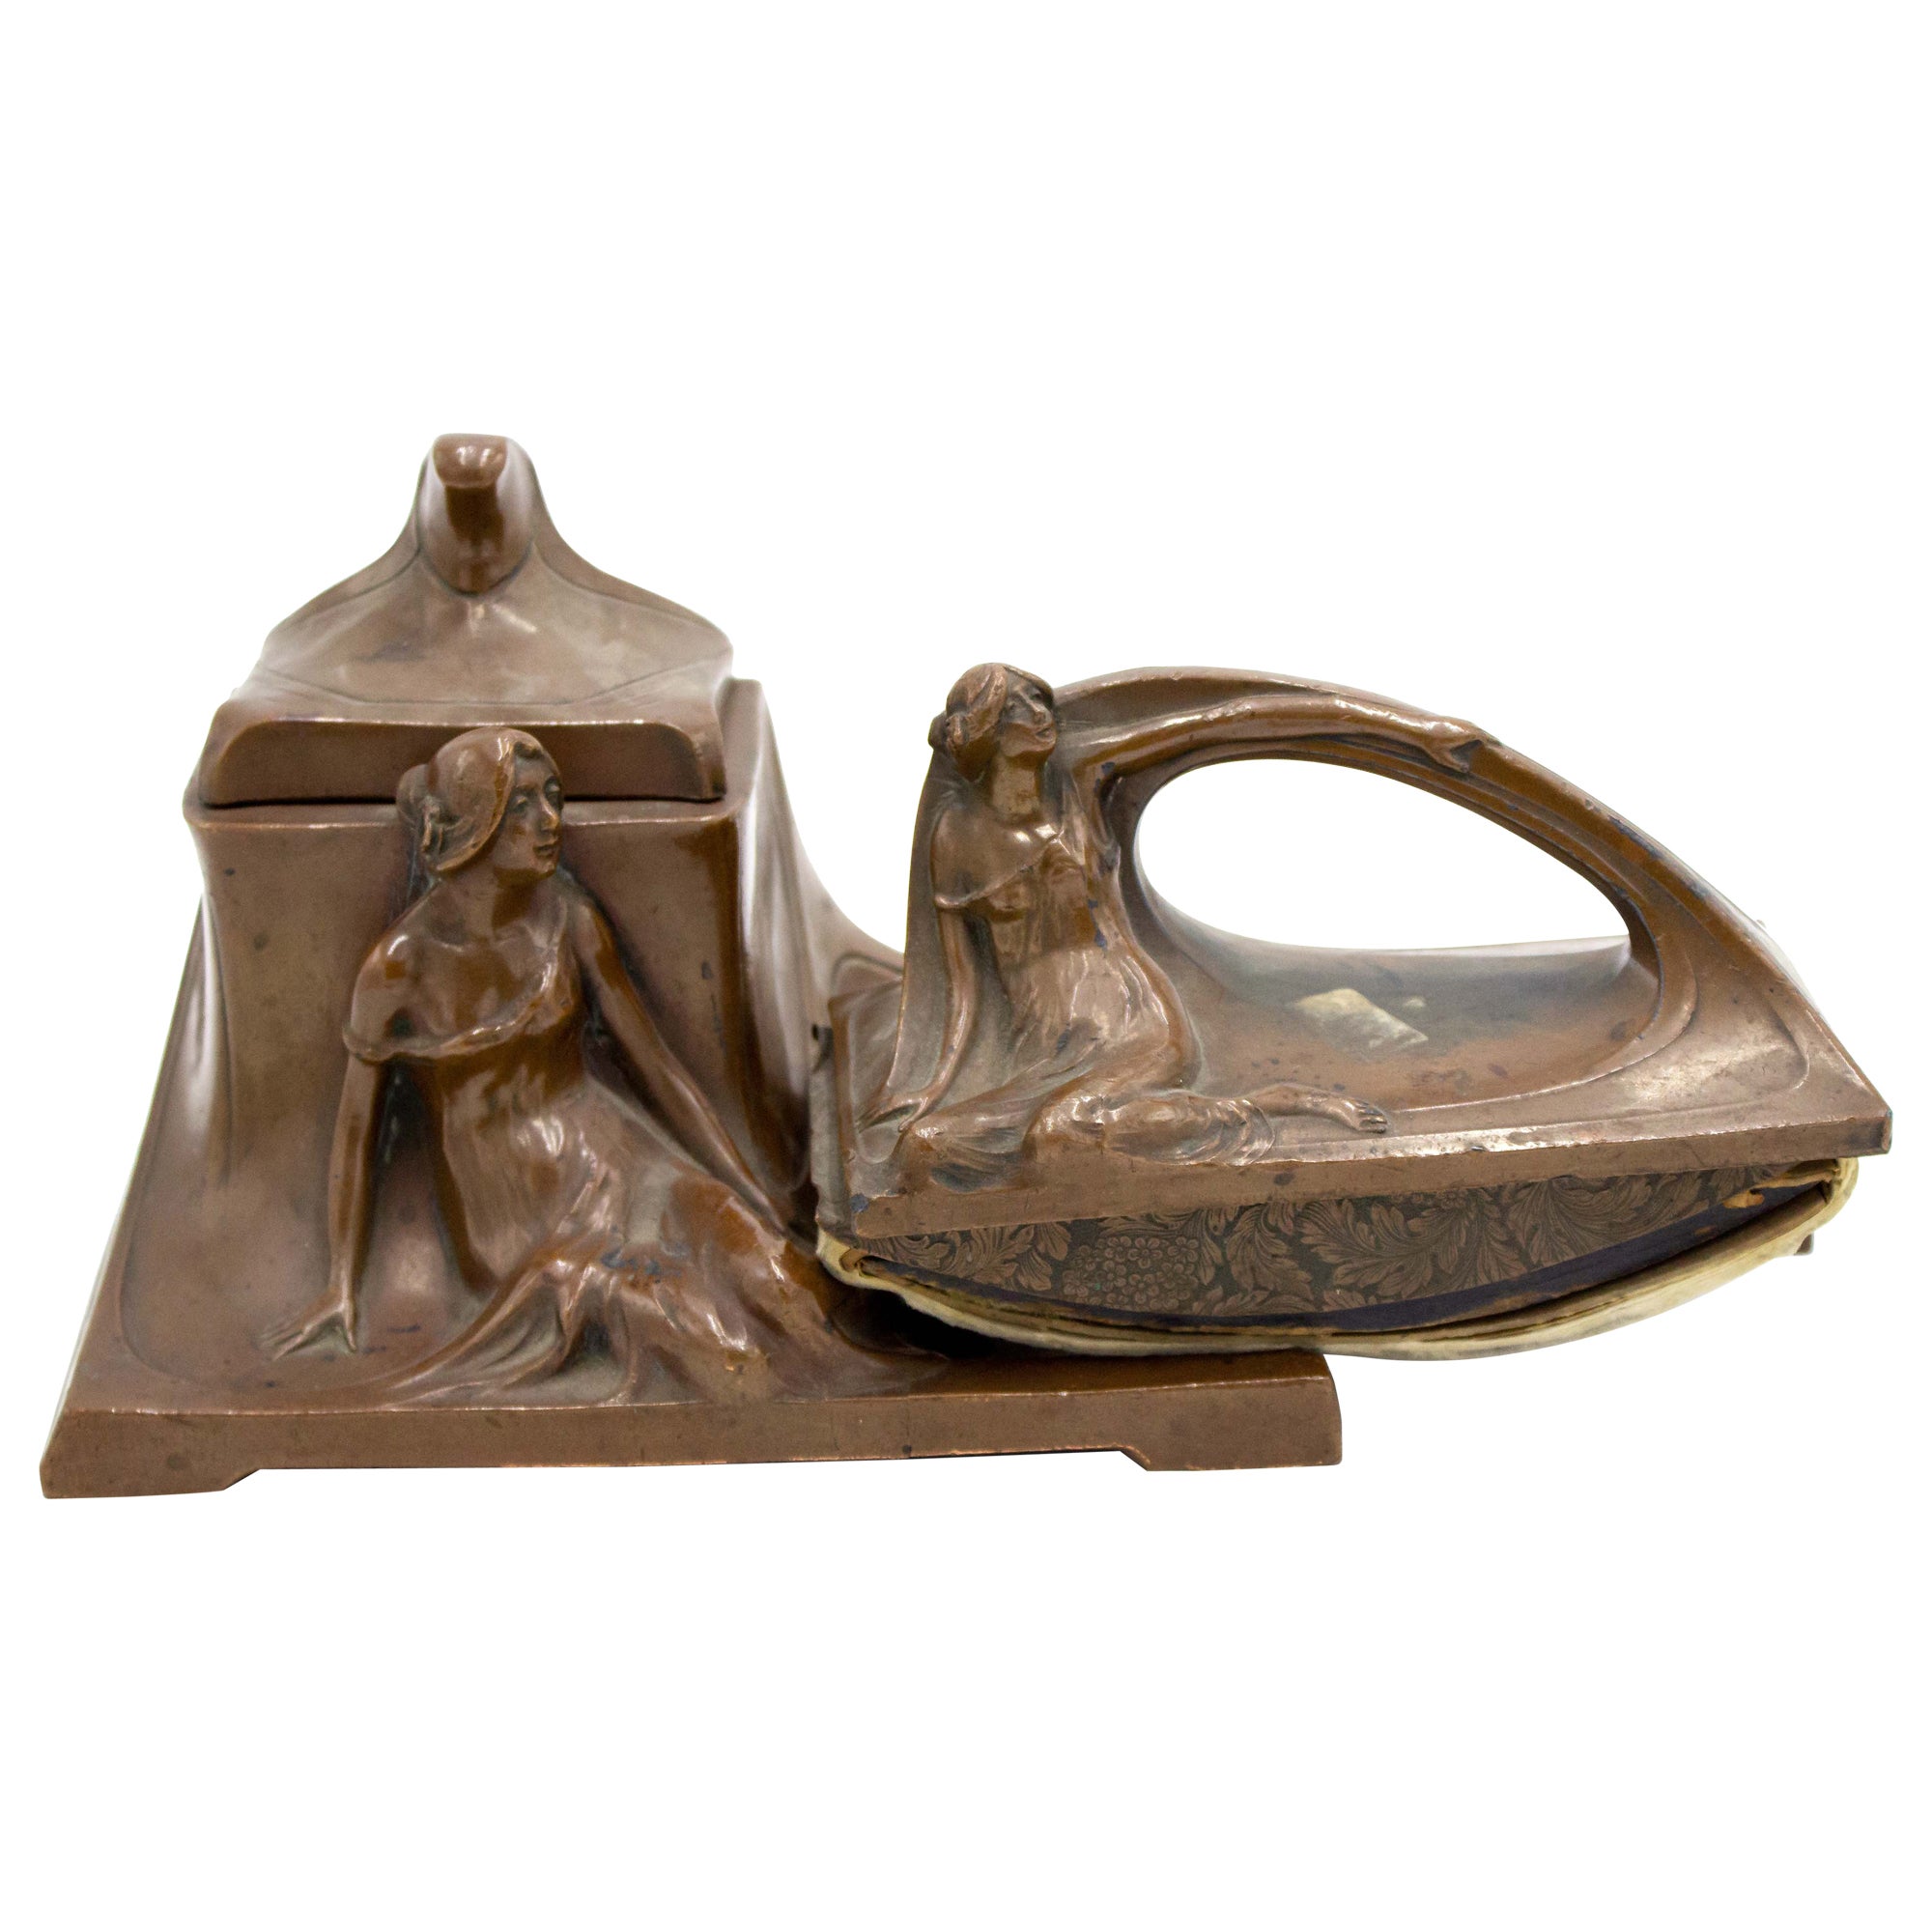 2-Piece French Art Nouveau Copper Inkwell